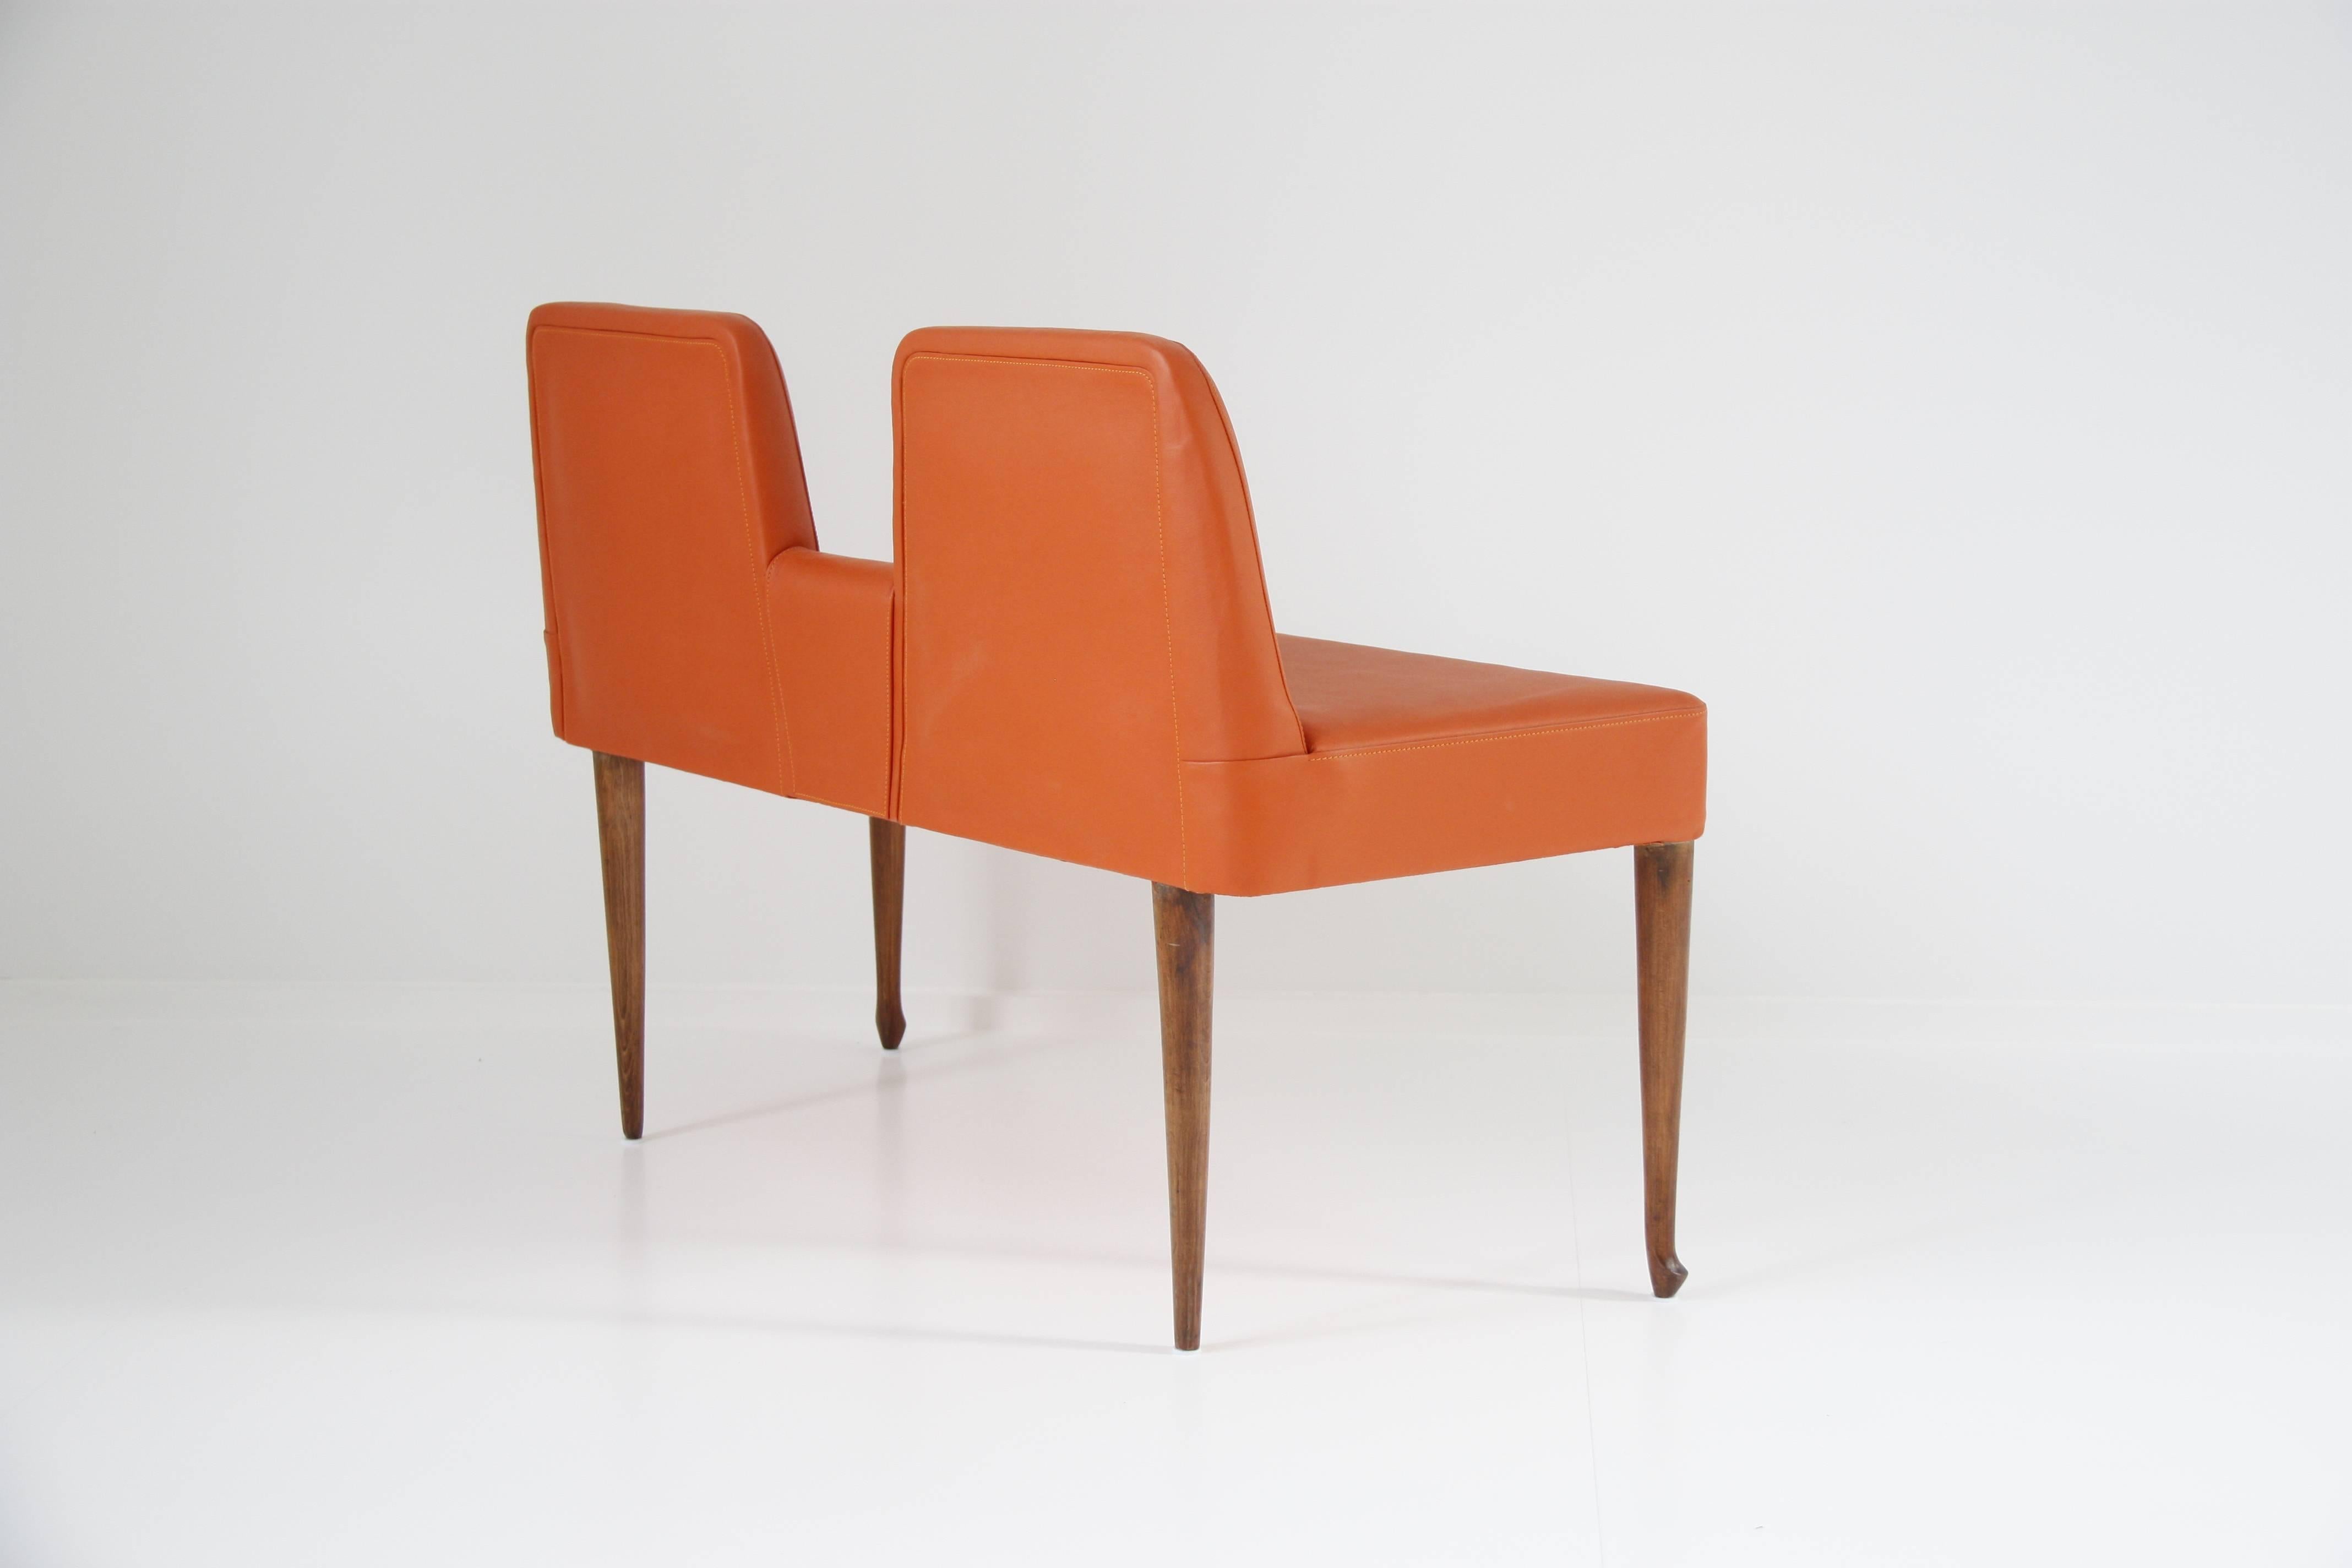 Mid-Century Modern Vintage Italian Orange Leather Bench with Low Back, circa 1960 For Sale